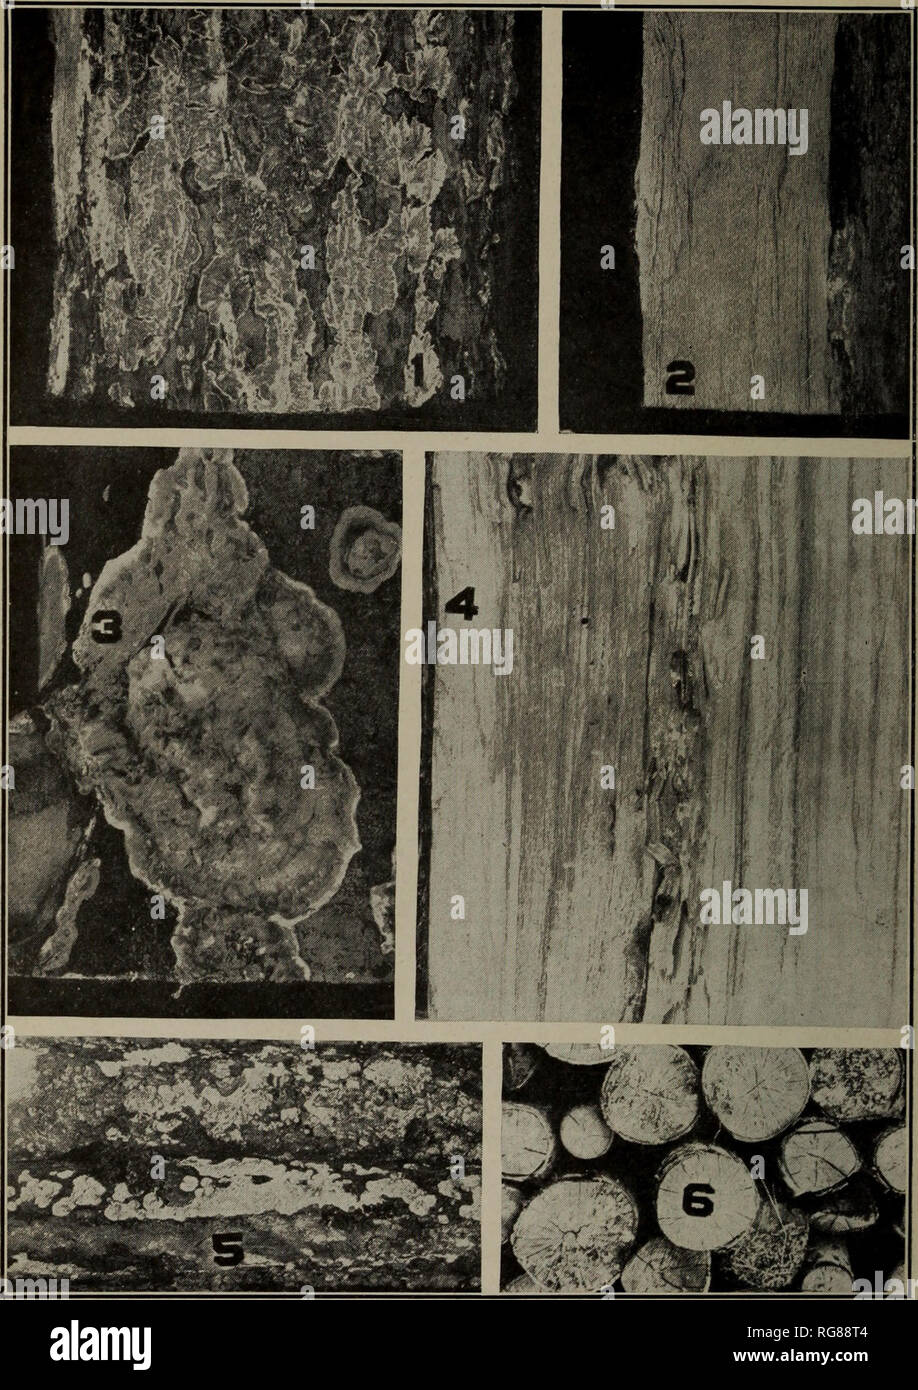 . [Bulletins on forest pathology : from Bulletin U.S.D.A., Washington, D.C., 1913-1925]. Trees; Plant diseases. Bui. 1298, U. S. Dept. of Agriculture Plate II. Fig. 1.—Encrusting fruit bodies of Polystictus abietinus on a hemlock pulp log. This fungus is very abundant on coniferous wood. The pore surface is violet when fresh Fig. 2.—Longitudinal section of log shown in fig. 1. Note the minute pockets, primarily in the sapwood, which are characteristic marks of this fungus Fig. 3.—Fruit bodies of Polyporus adustus on aspen pulp wood. The pore surface is smoky brown to smoky black. This fungus a Stock Photo